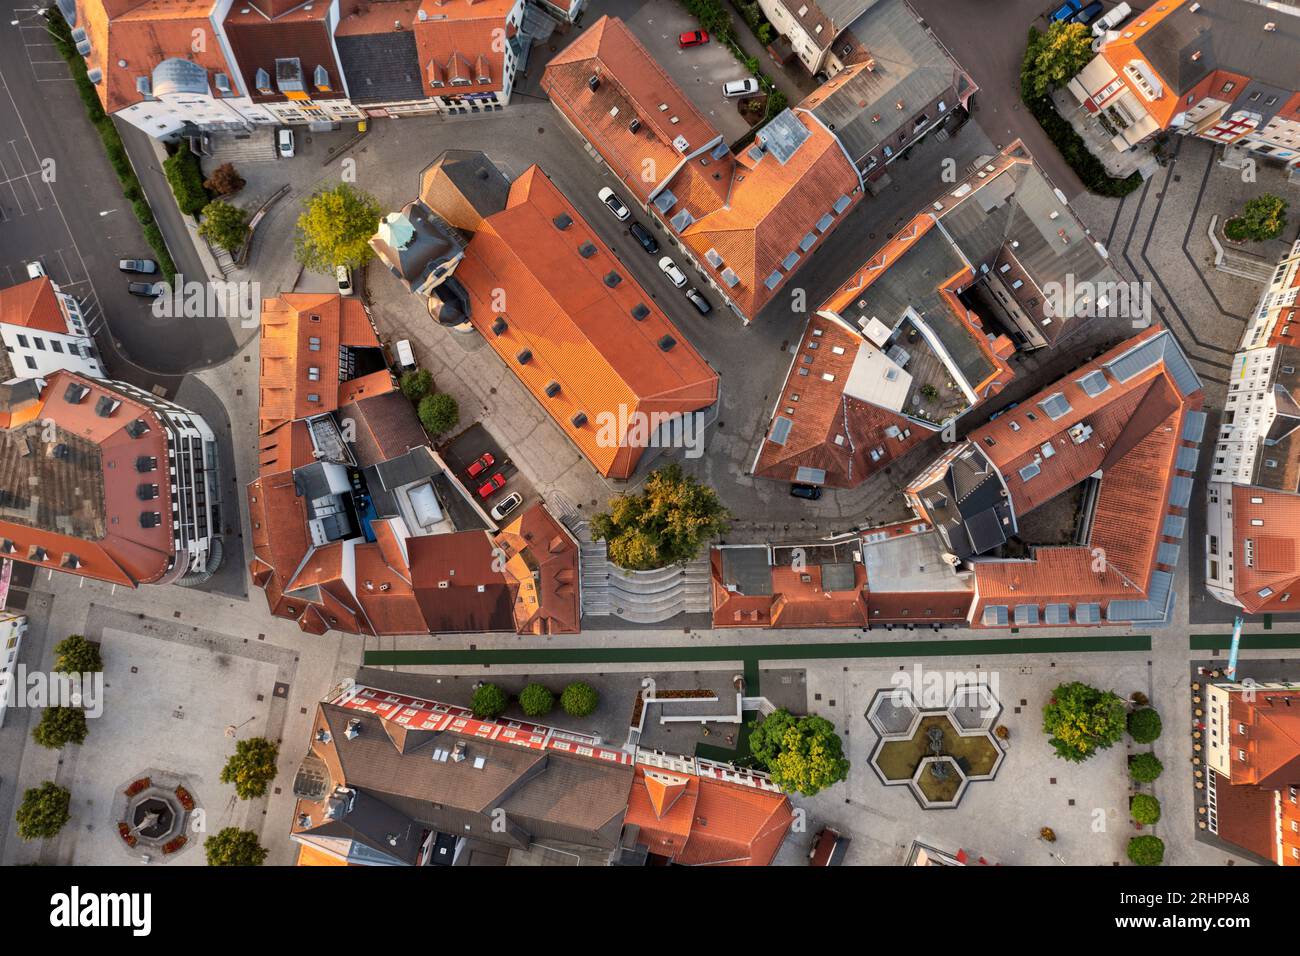 Germany, Thuringia, Suhl, city, houses, roofs, streets, church Sankt Marien, old city hall, morning light, overview, top view, aerial view Stock Photo